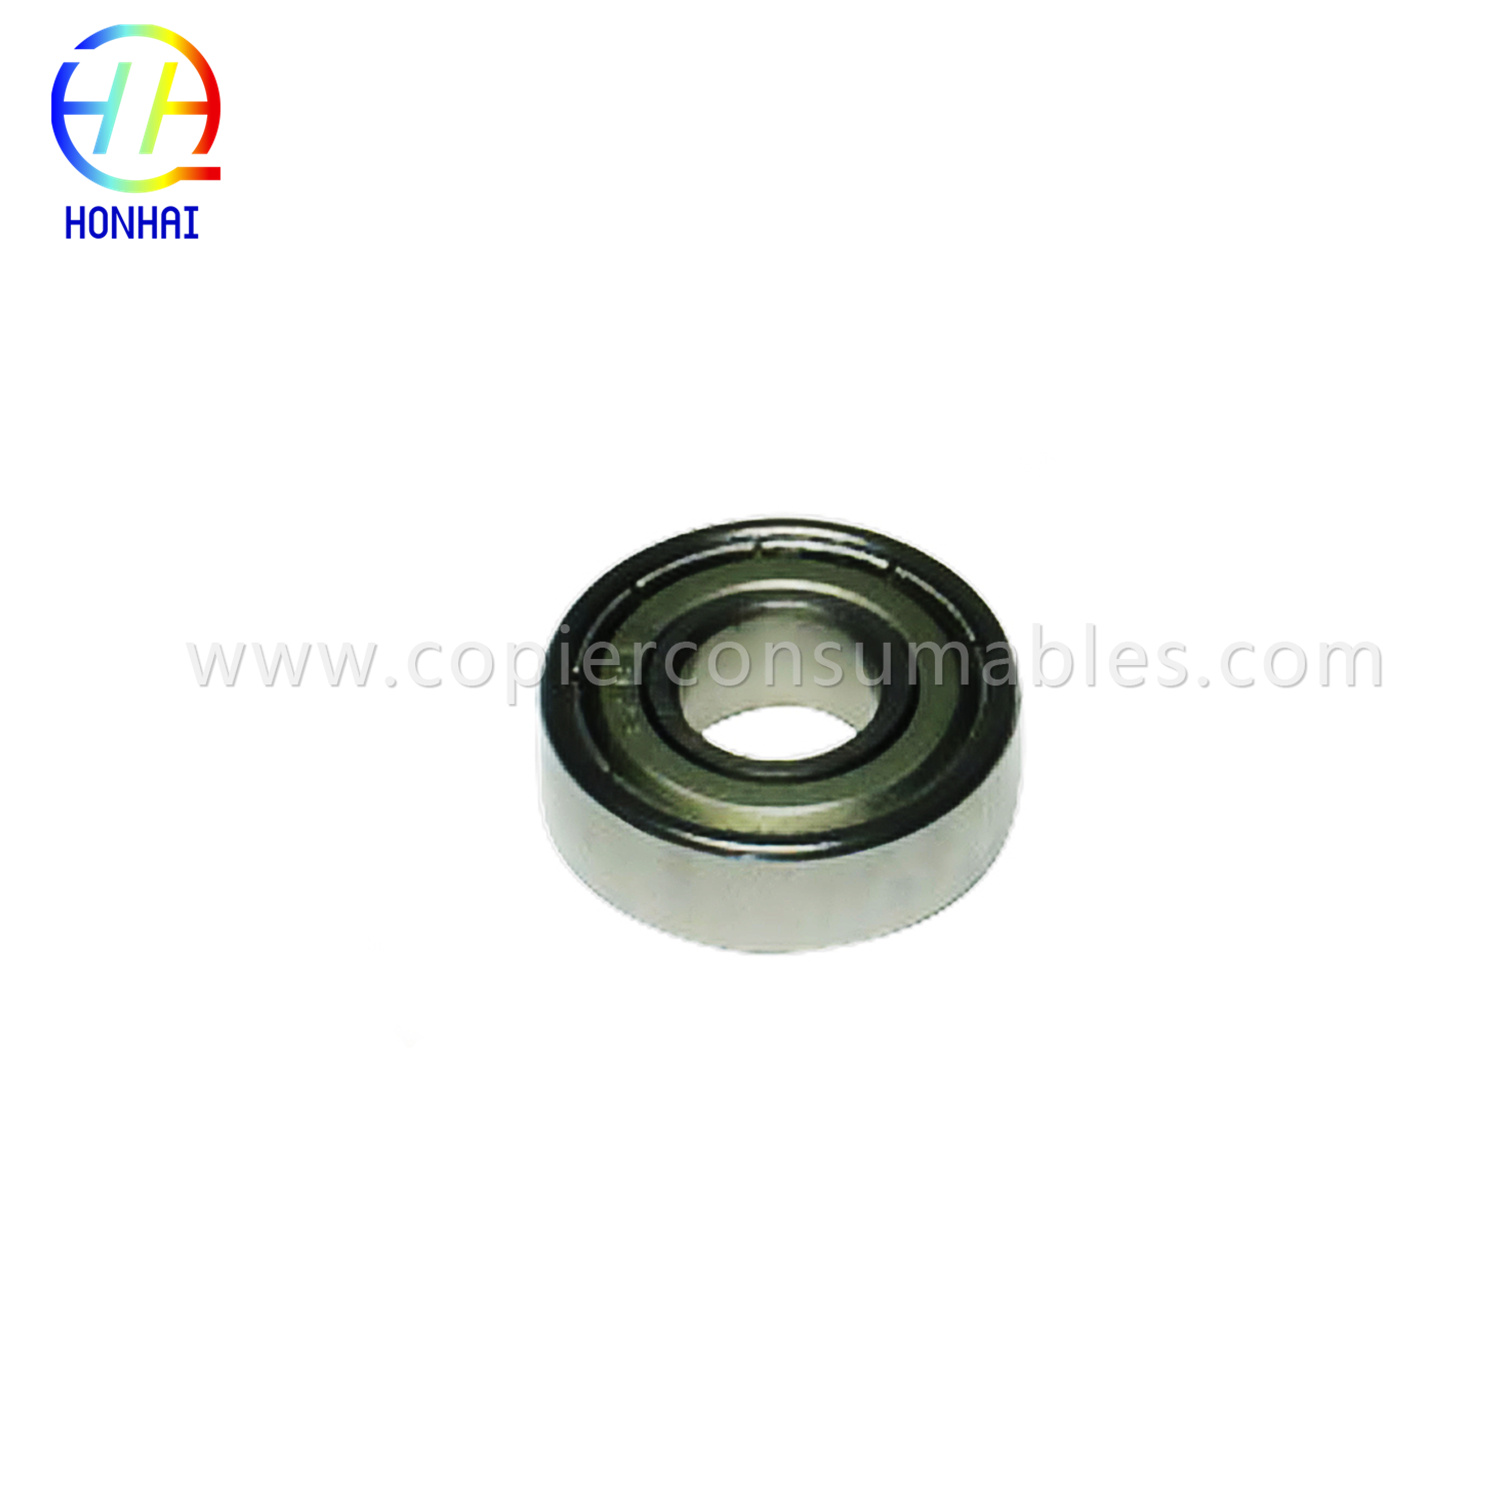 Hot sale Factory Thermal Printer Spare Parts - Lower Fuser Roller Bearing for Ricoh Af1022 1015 1018 1018d 1022 1027 2022 2027 220 270 3025 3025p (PN. AE030030)  – HONHAI